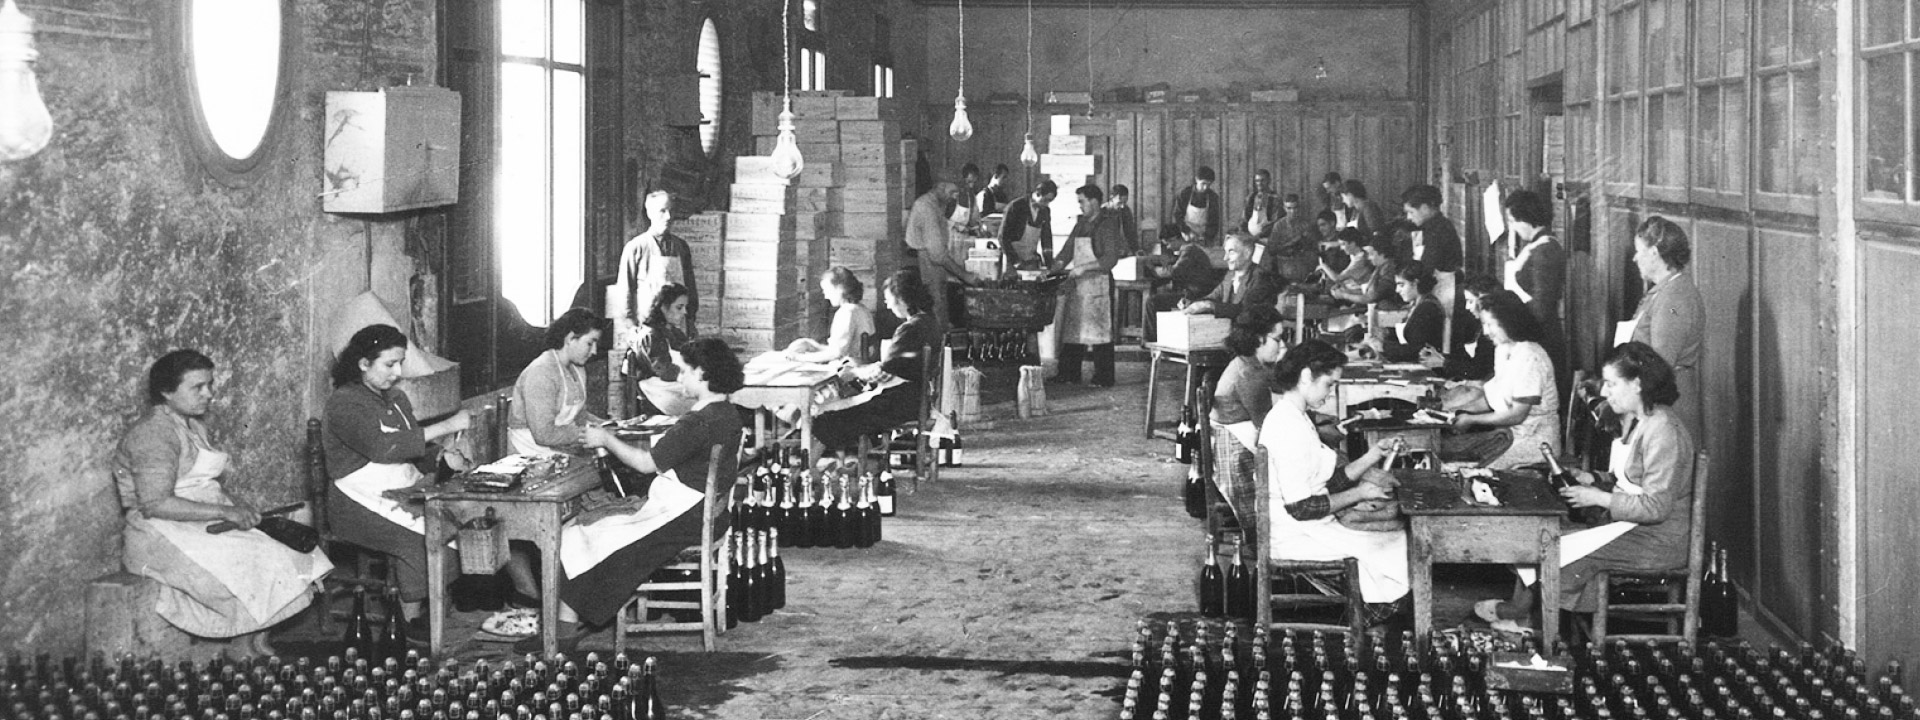 Early Freixenet female employees applying labels to bottles in a large room.